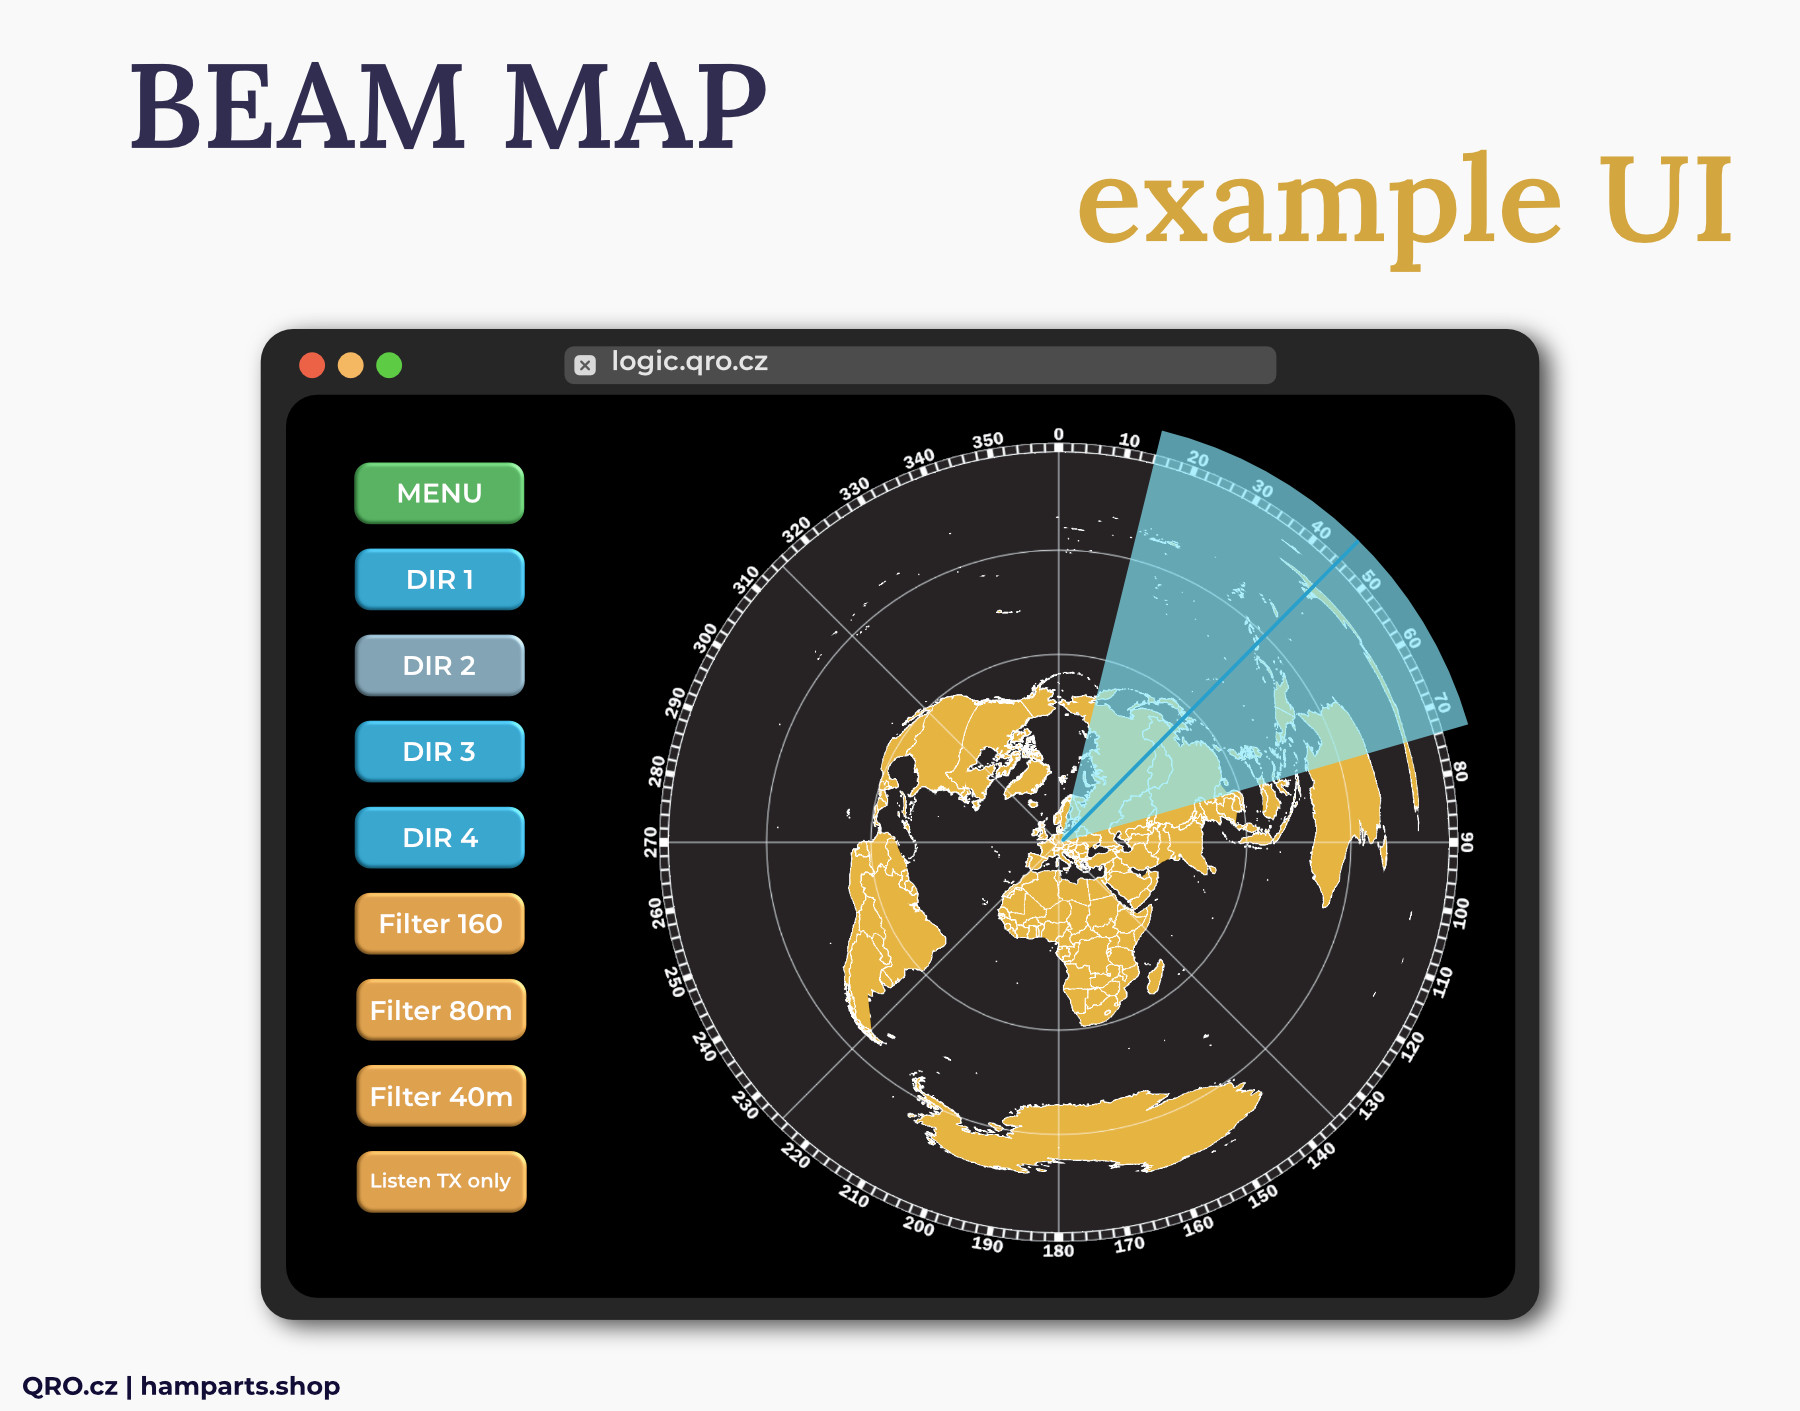 remote options control beam map example by qro.cz hamparts.shop